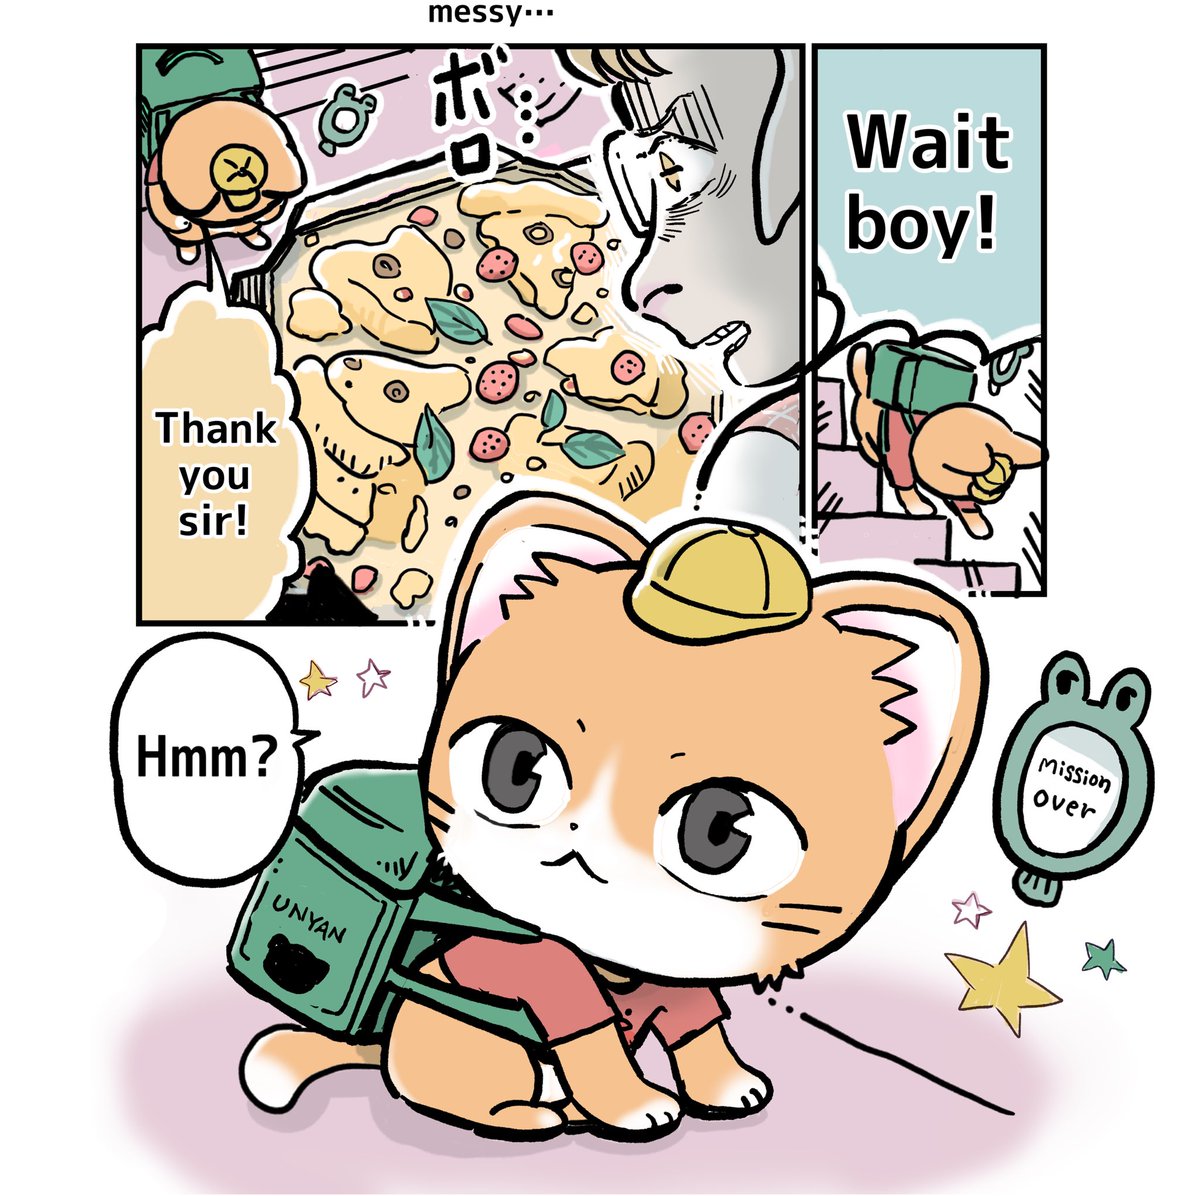 【✨NEWS✨】
You can read the English translation of Unyan's comic on Instagram!😸
https://t.co/2ET3GFPJCx
━━━━━━━━━━━━━━━━
Check out the rest of this comic! 